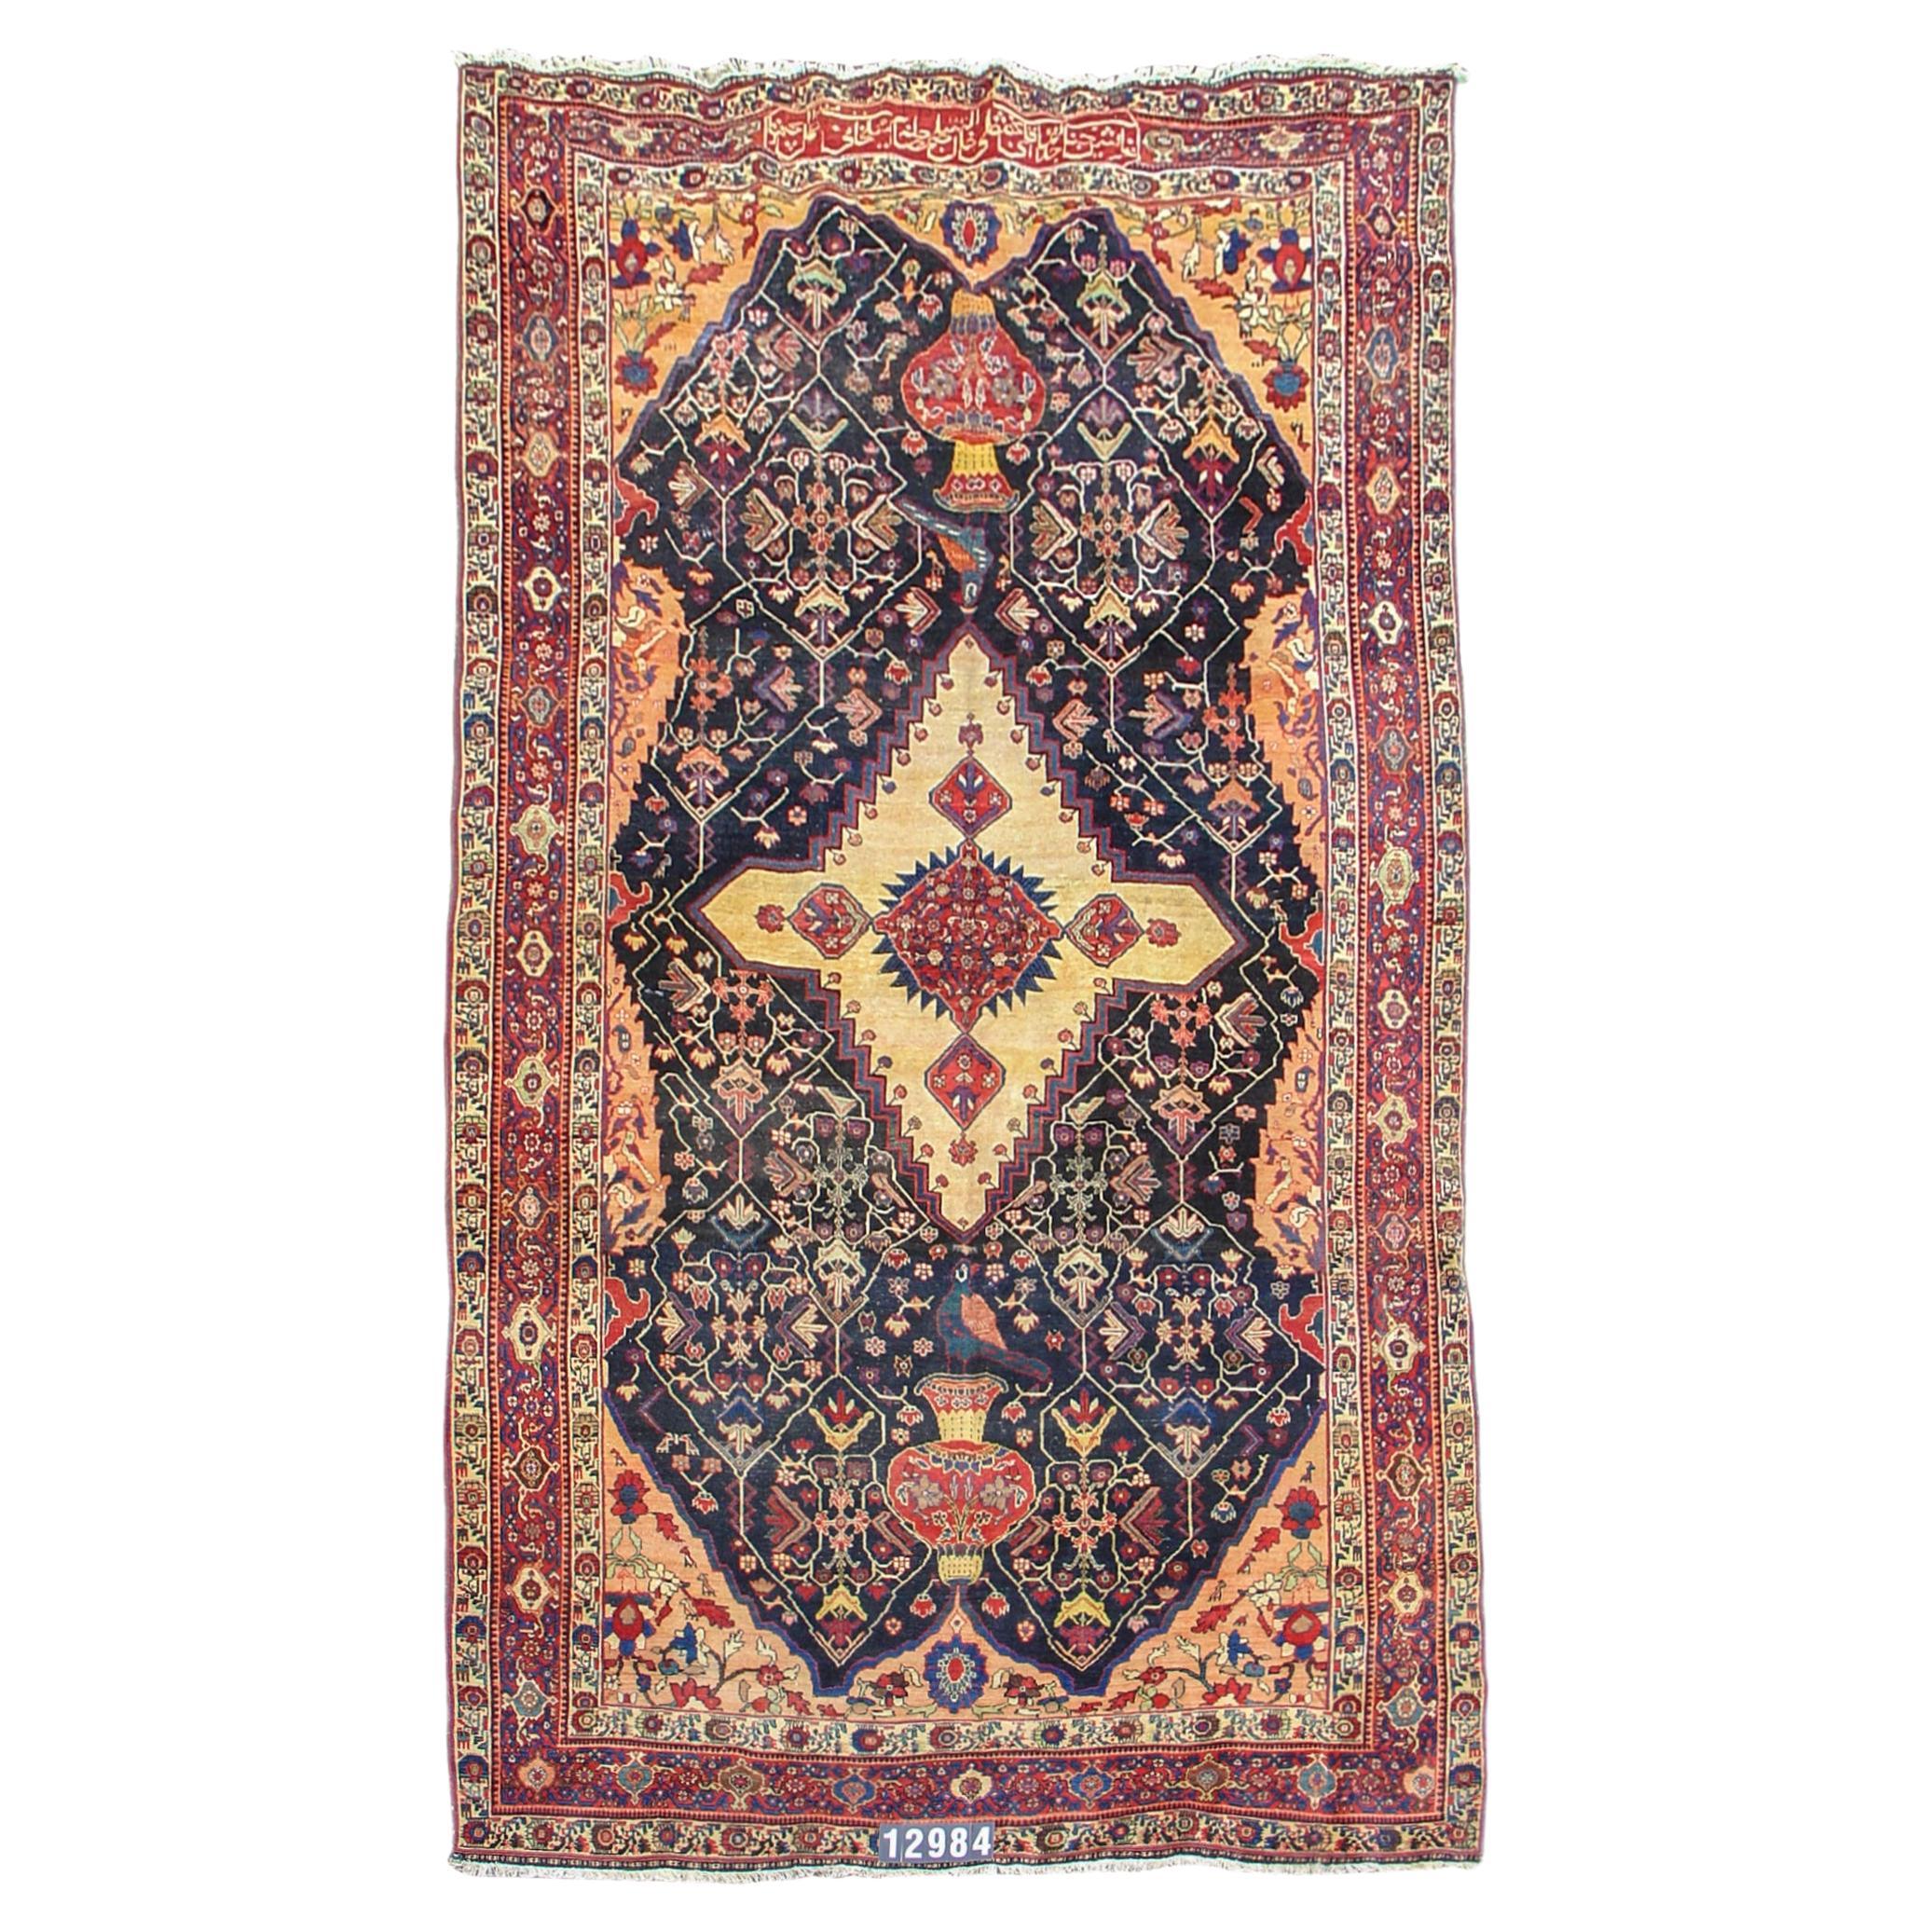 Antique Persian Bakhtiari Carpet Rug, Early 20th Century For Sale